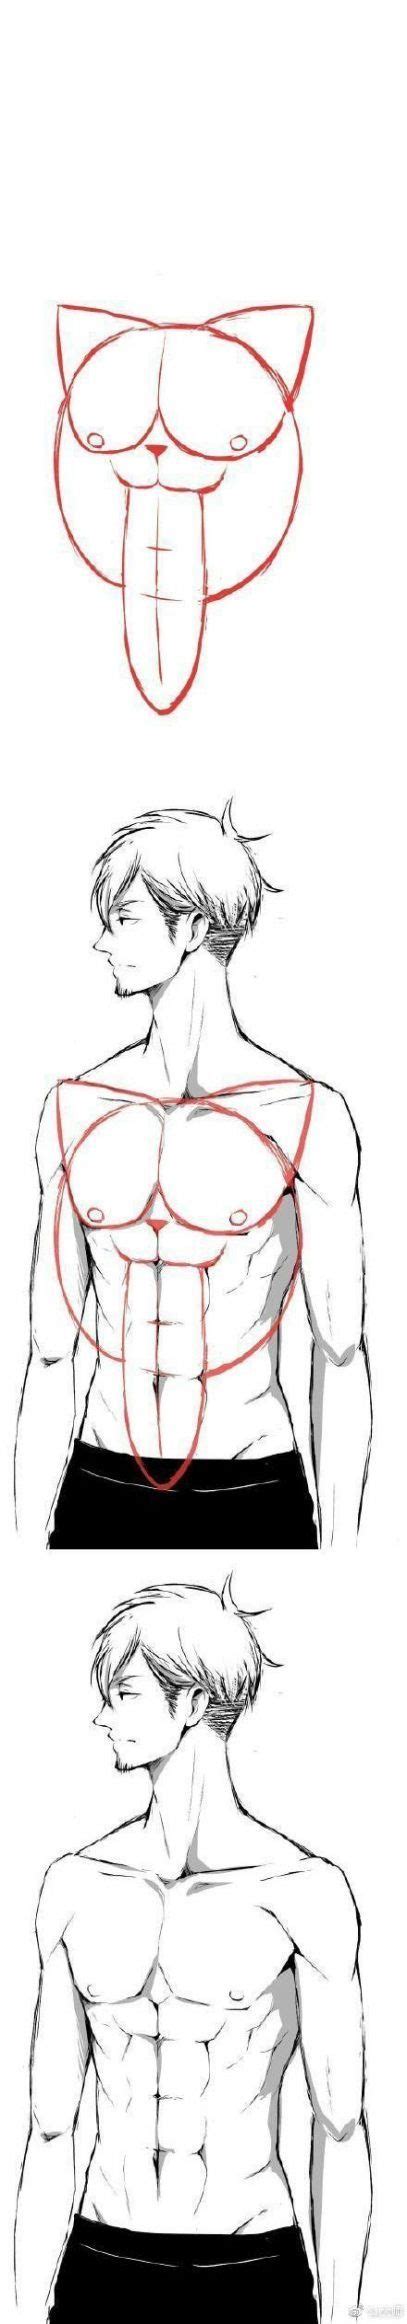 Anime Poses Female Upper Body Drawing Reference ~ How To Draw A Female